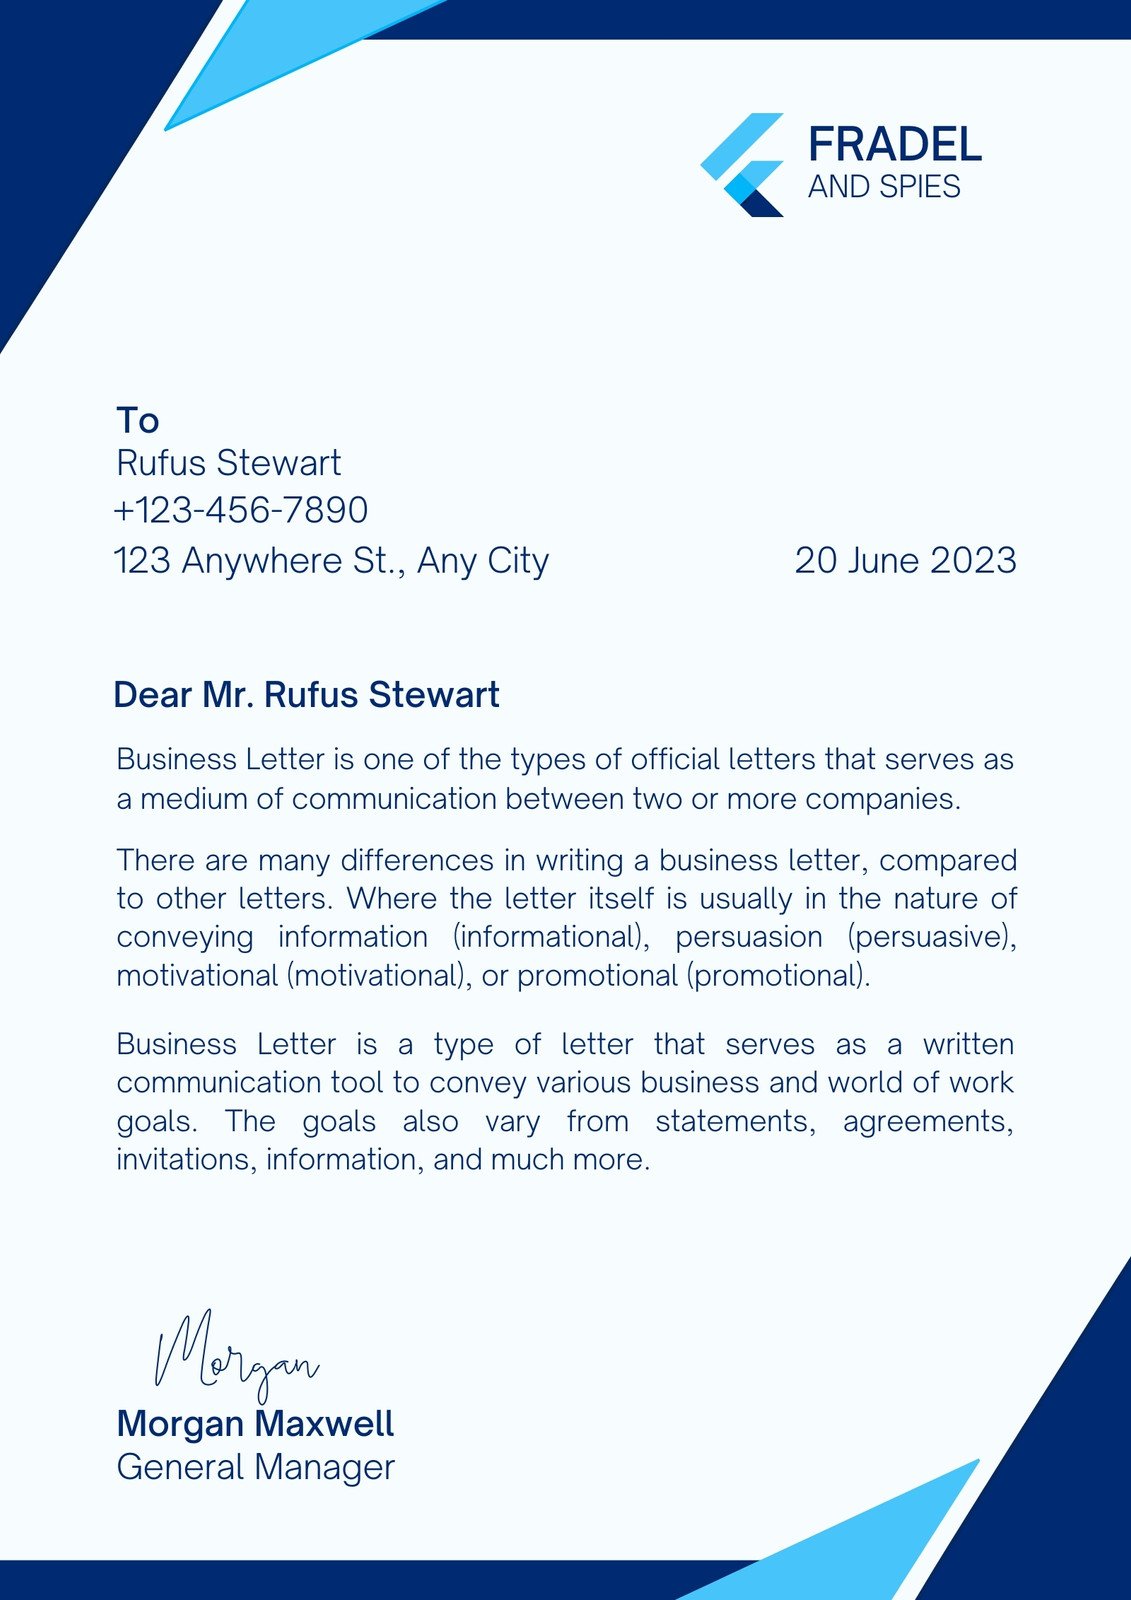 Free, printable business letterhead templates to customize | Canva